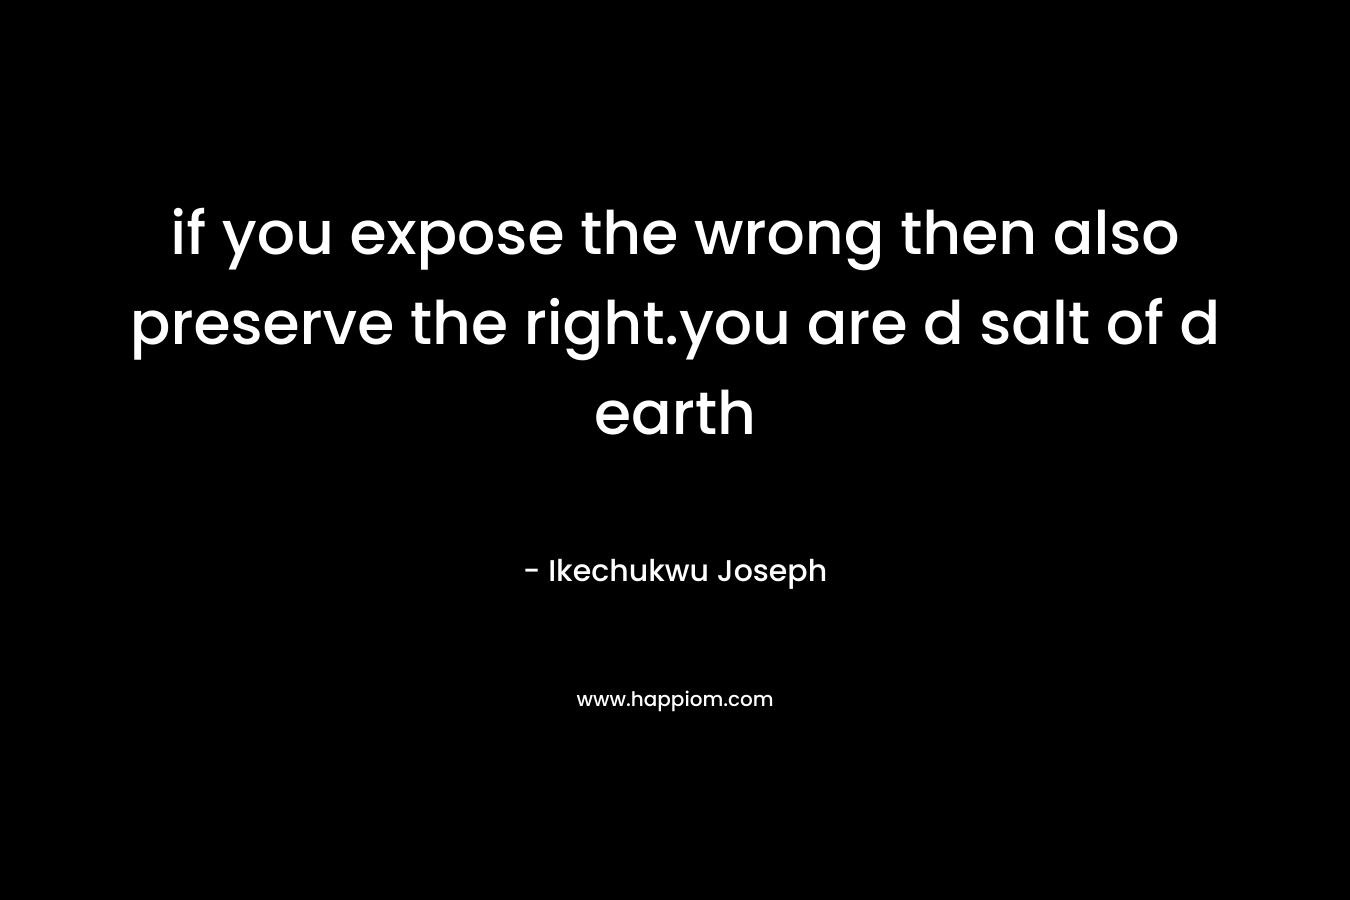 if you expose the wrong then also preserve the right.you are d salt of d earth